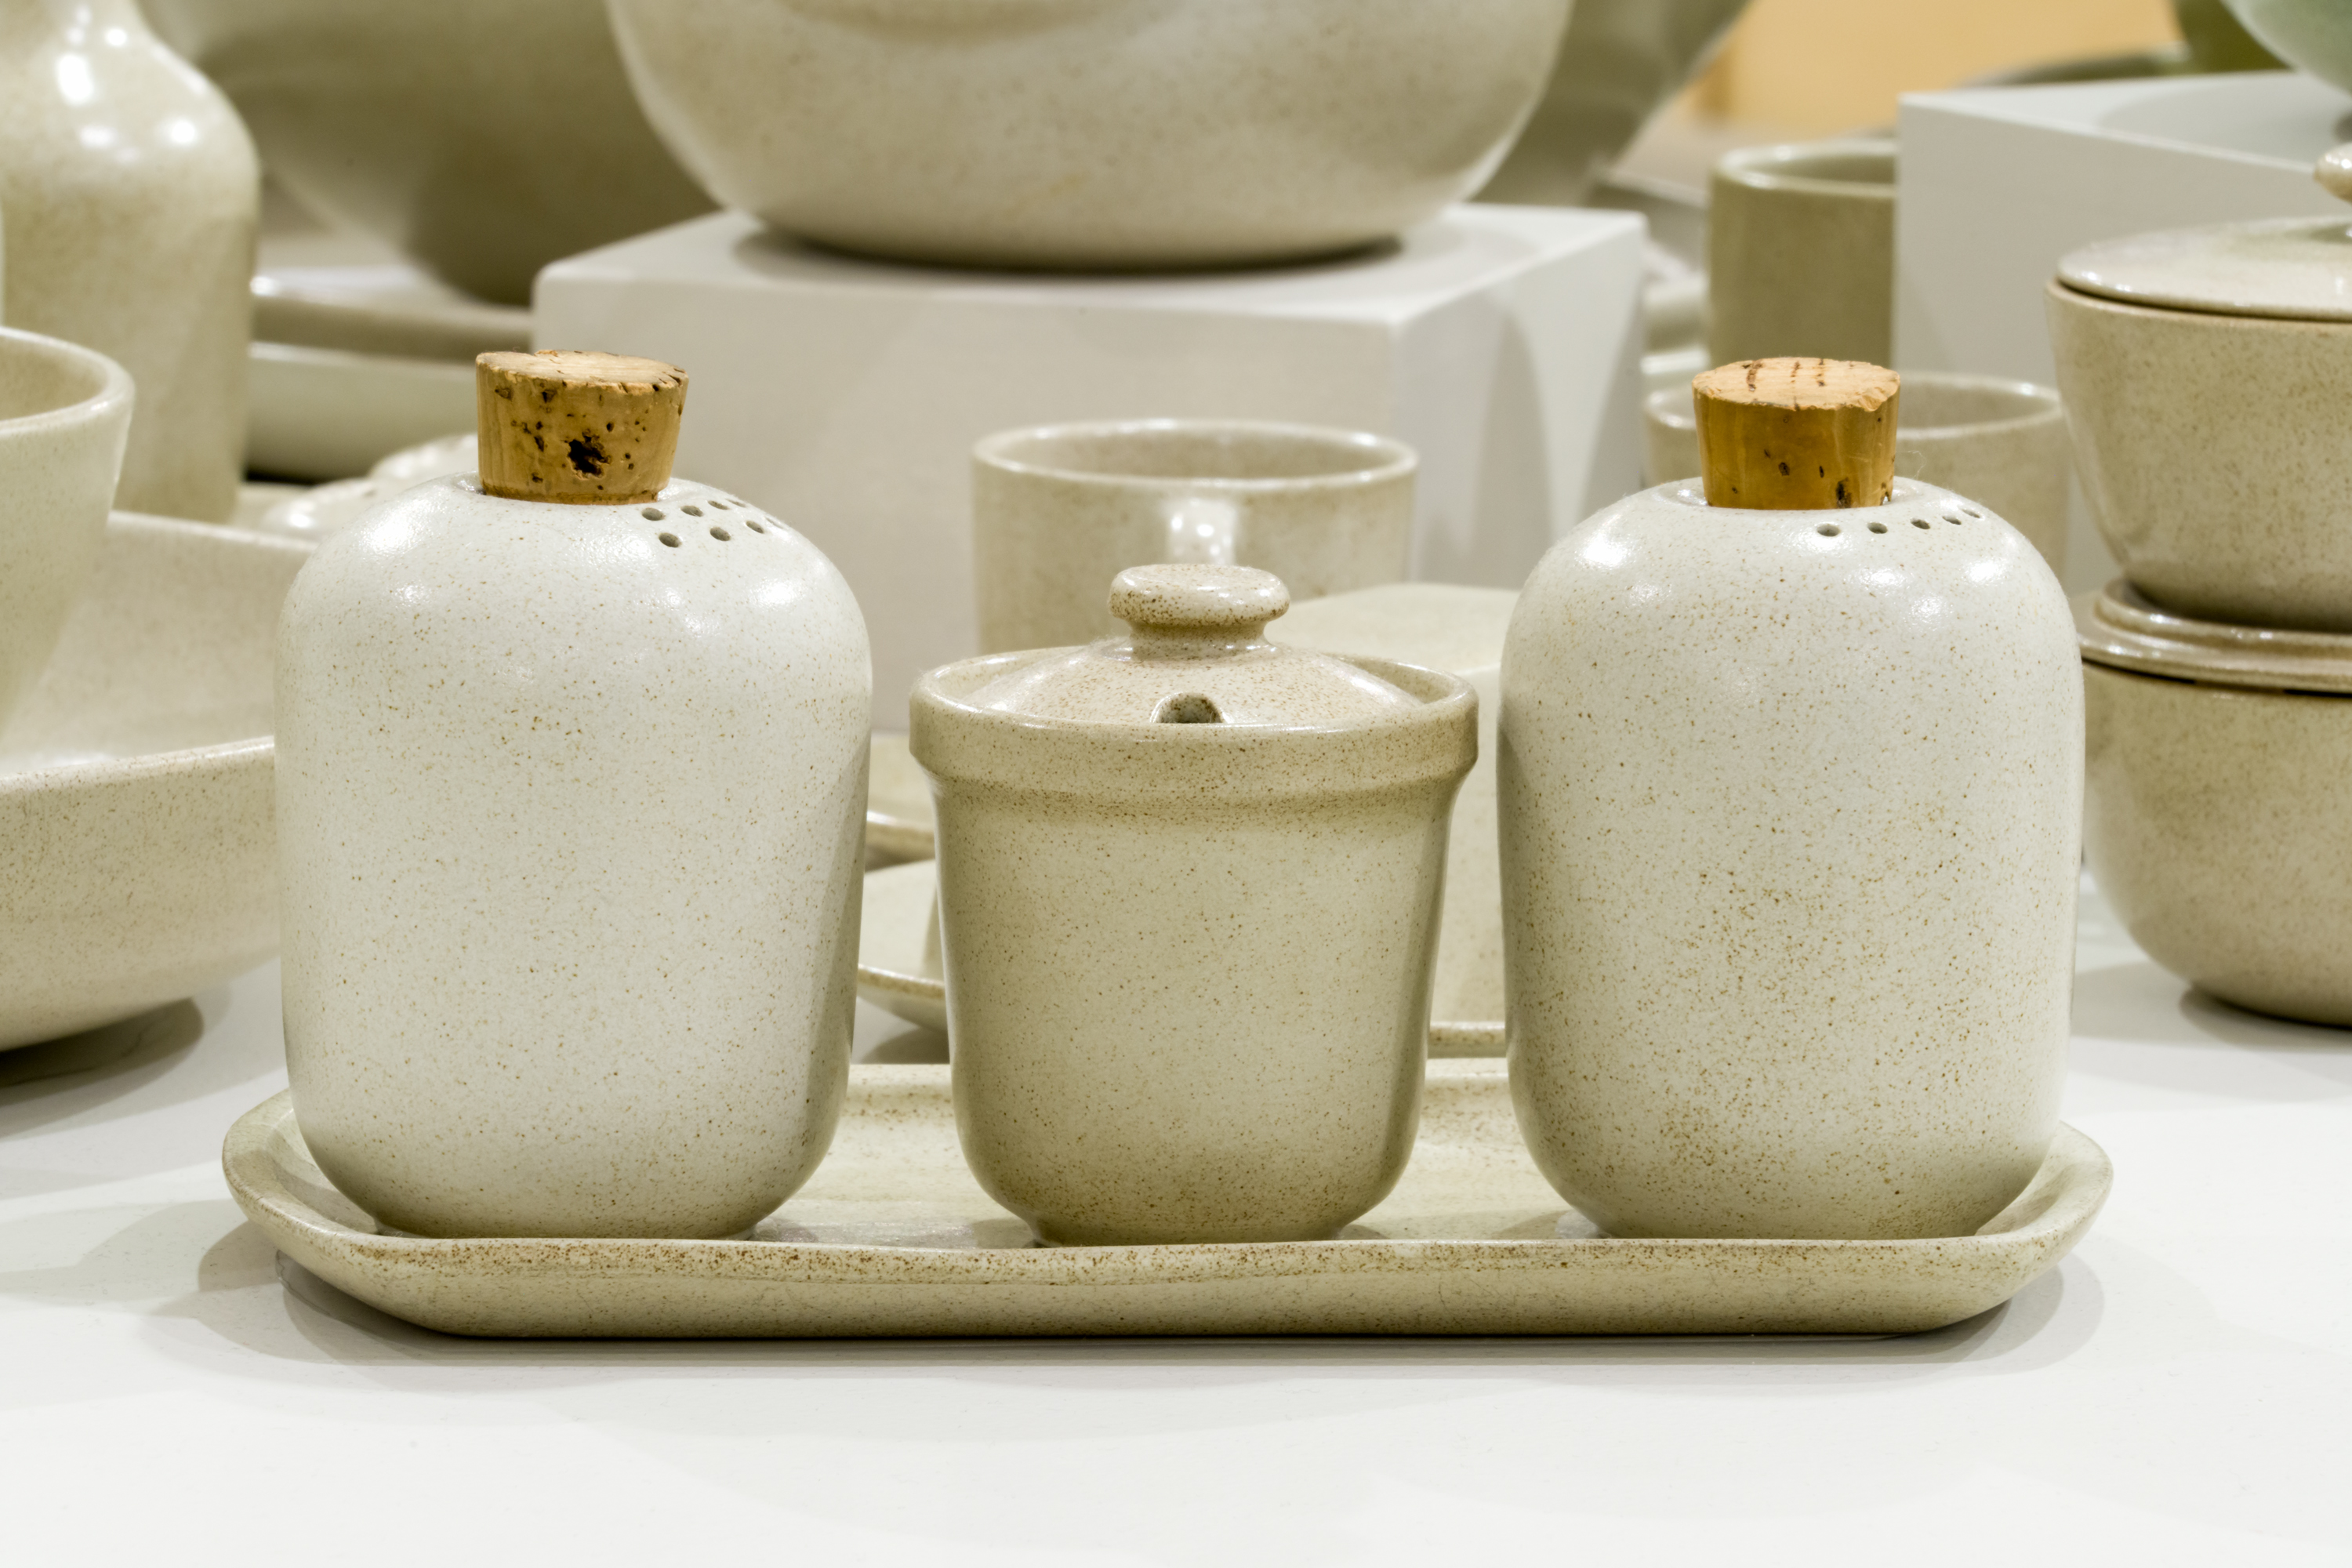 Salt and pepper shakers with a sugar bowl in between, in beige glaze.